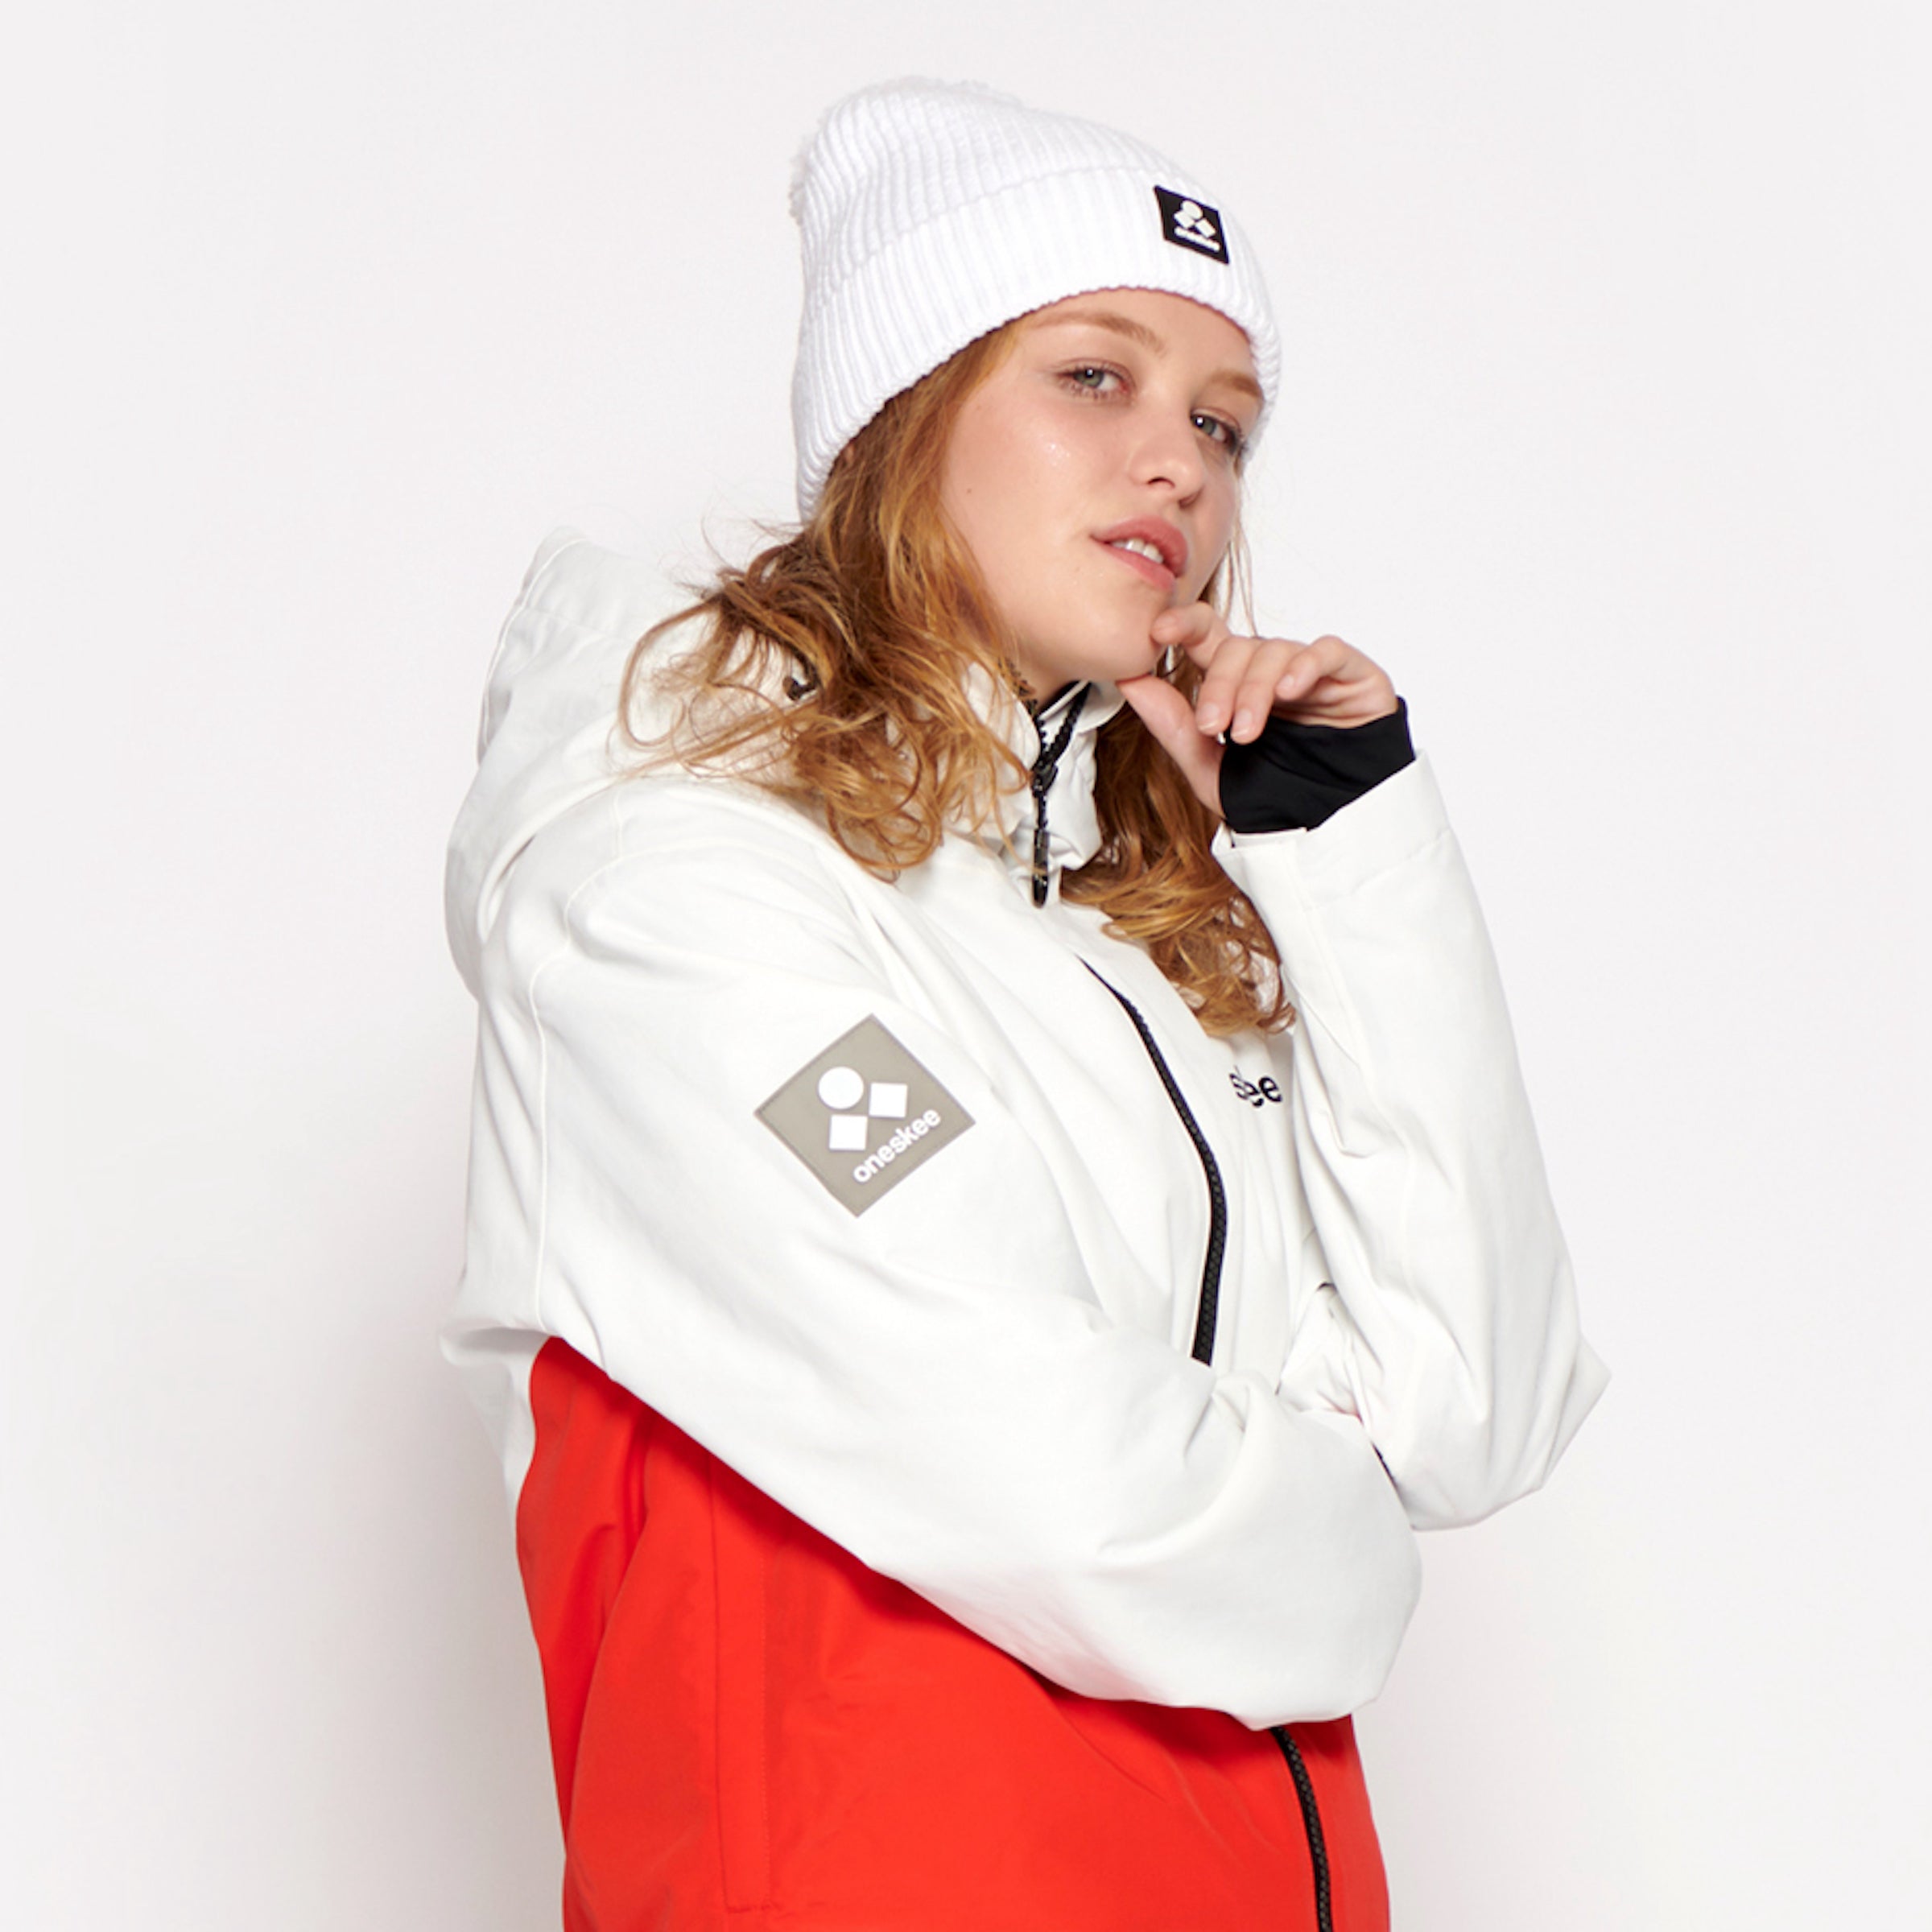 Women's Snow Suit, Red & White